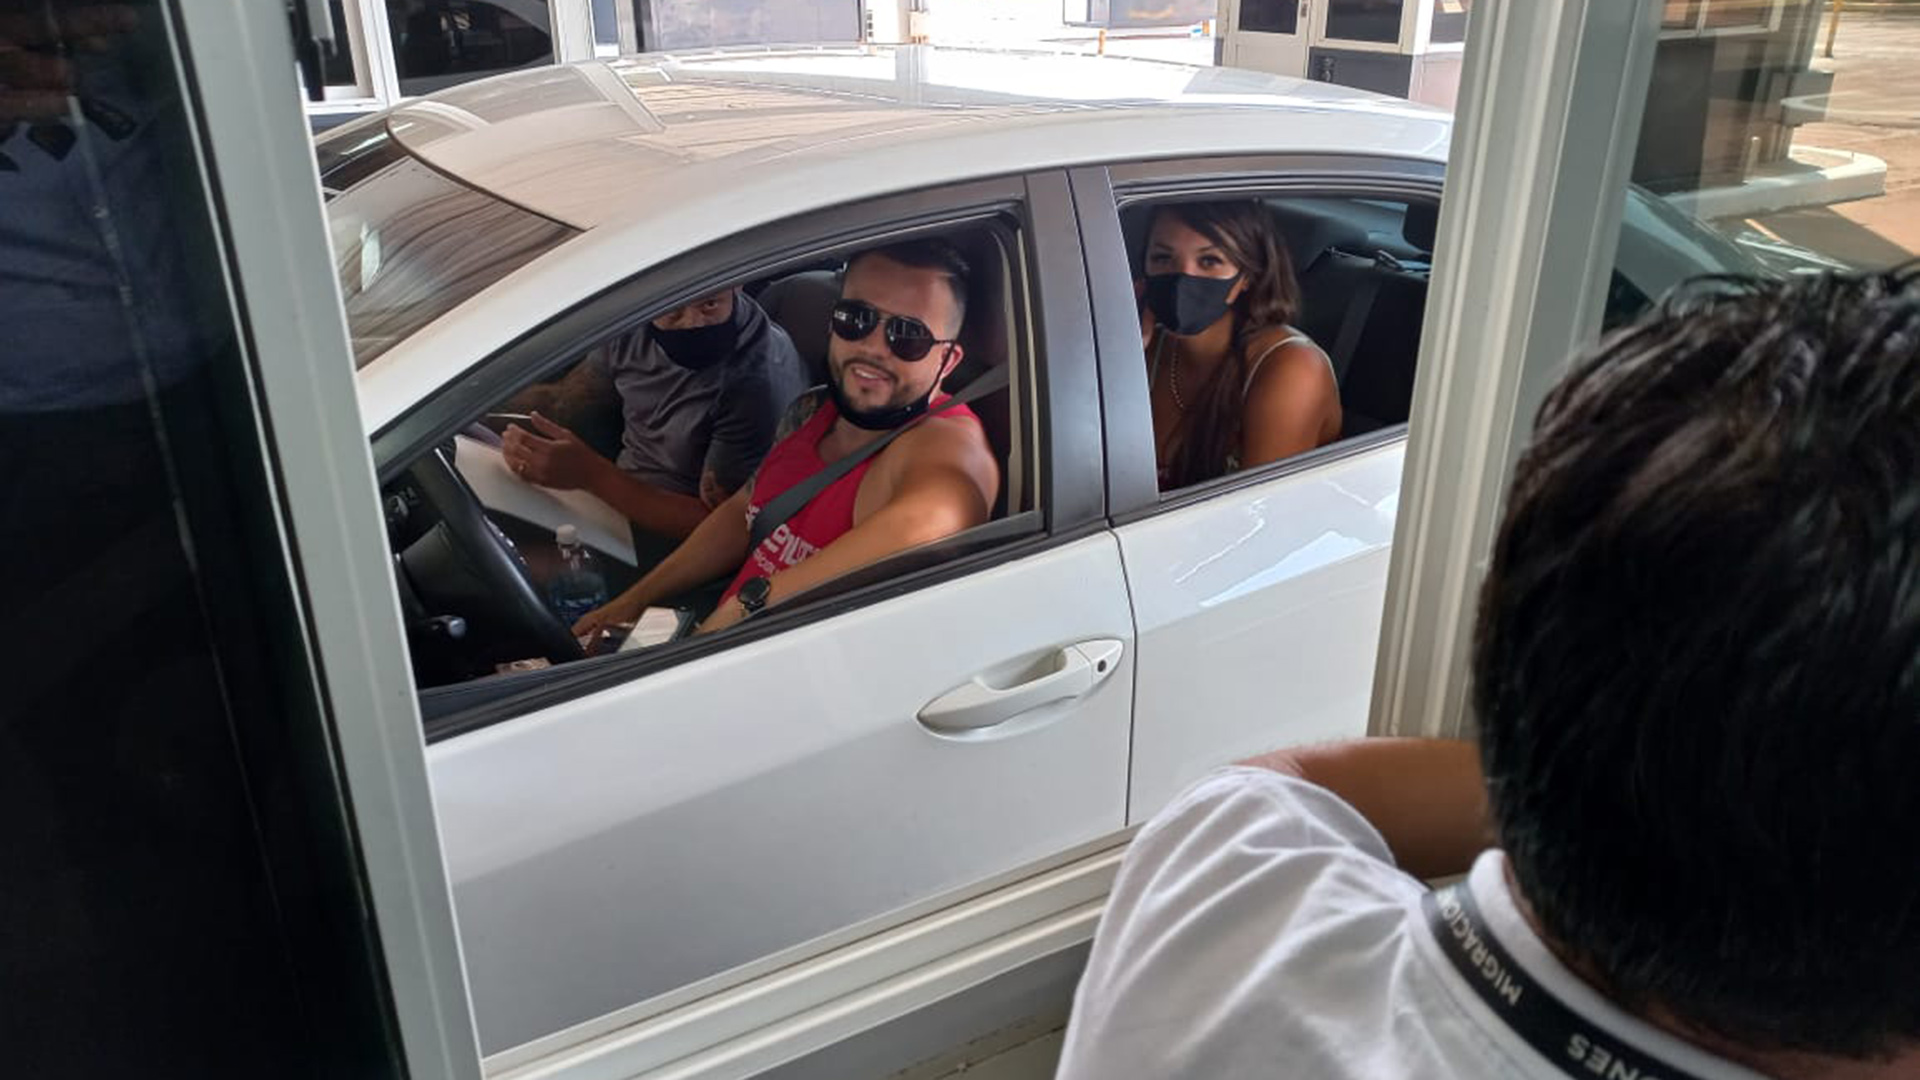 A group of Brazilians arrives in the country by car